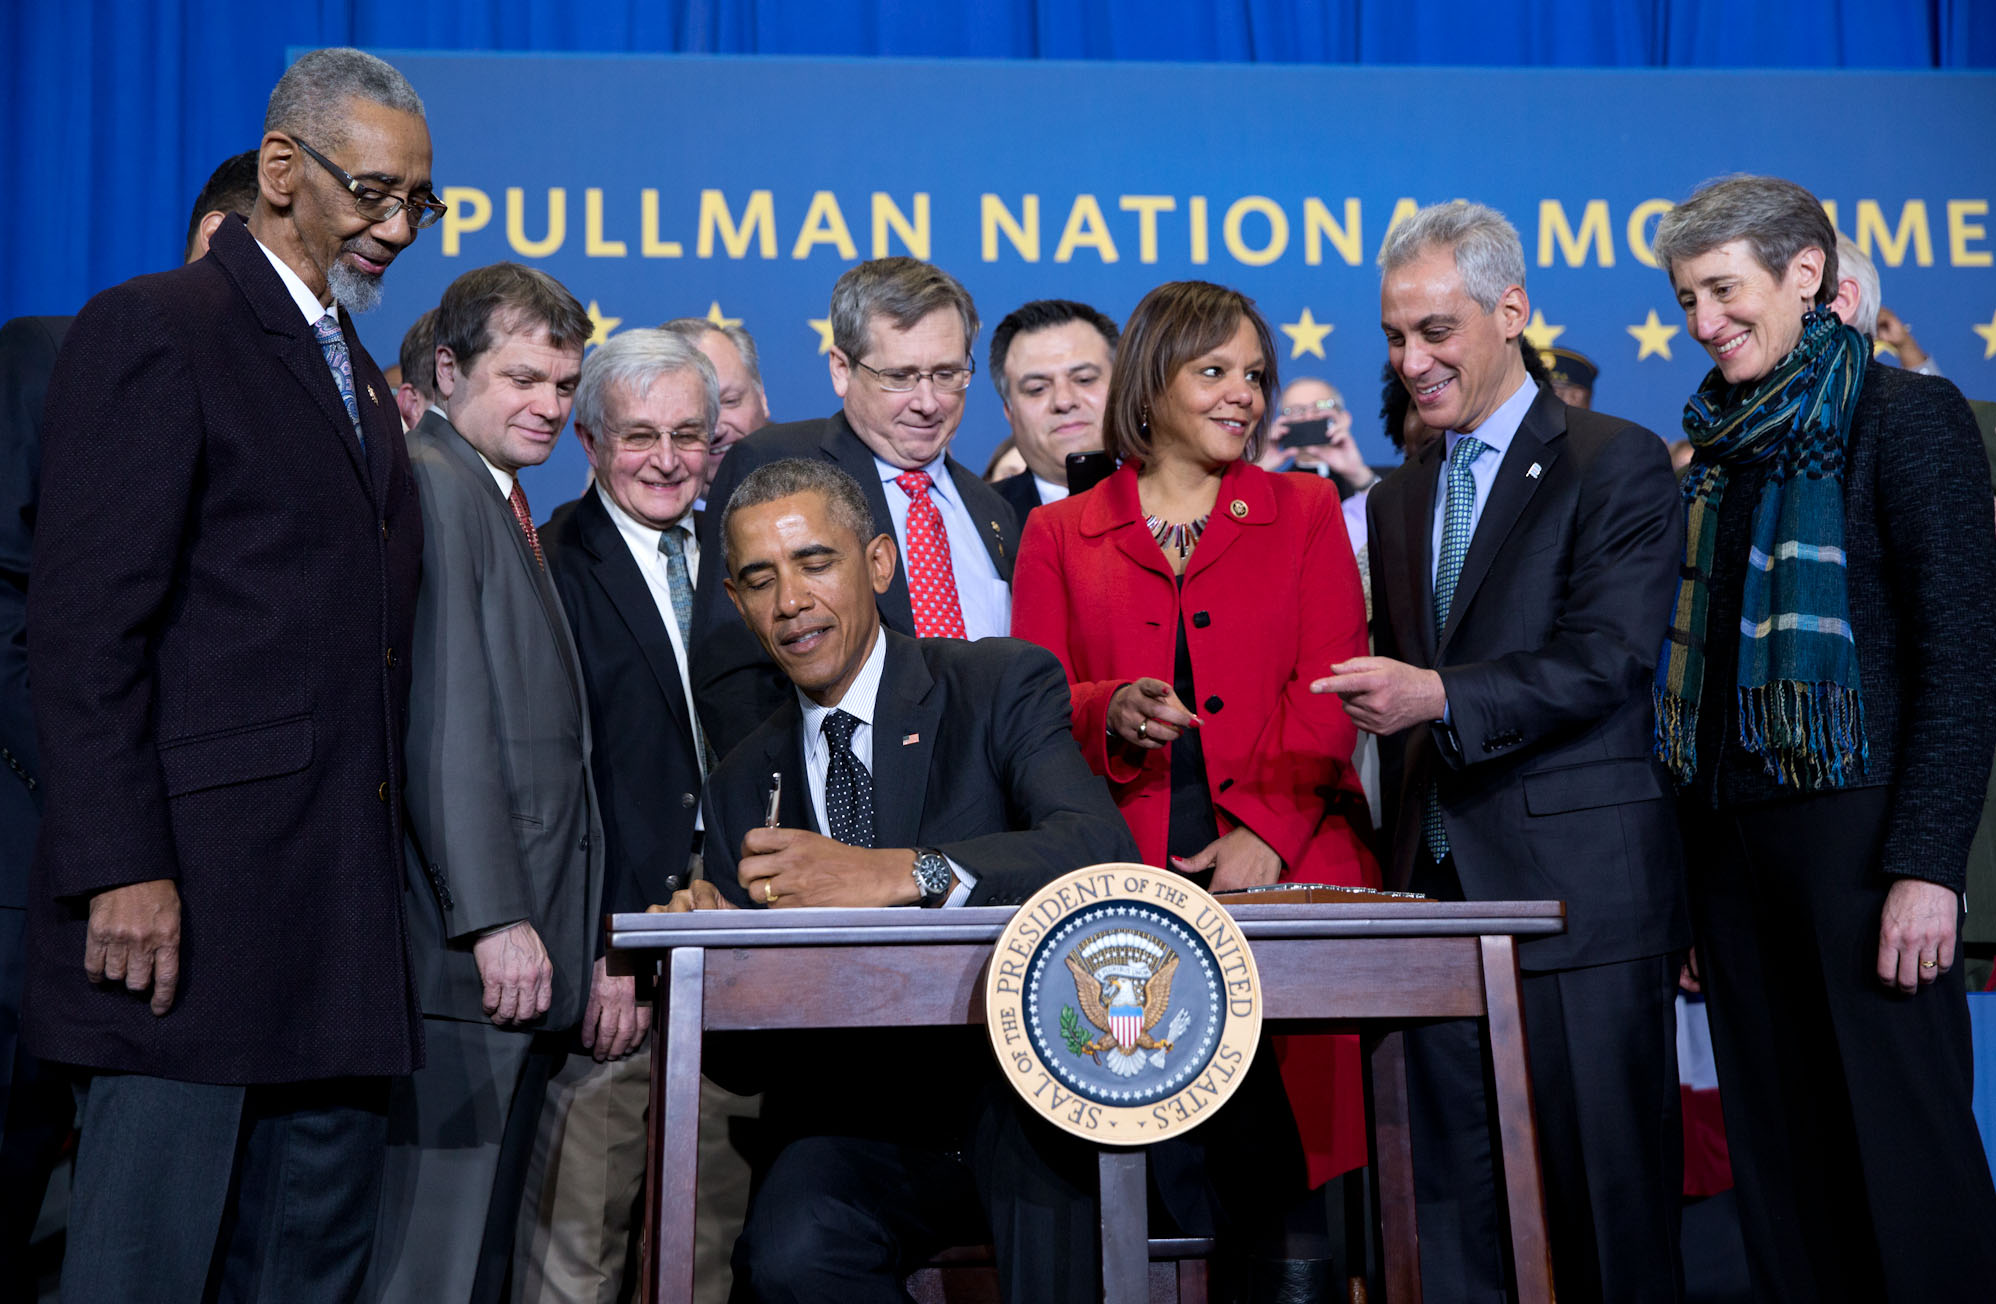 President Barack Obama signs a proclamation regarding the establishment of the Pullman National Monument at the Gwendolyn Brooks College Preparatory Academy in Chicago, Ill., Feb. 19, 2015. (Official White House Photo by Pete Souza)